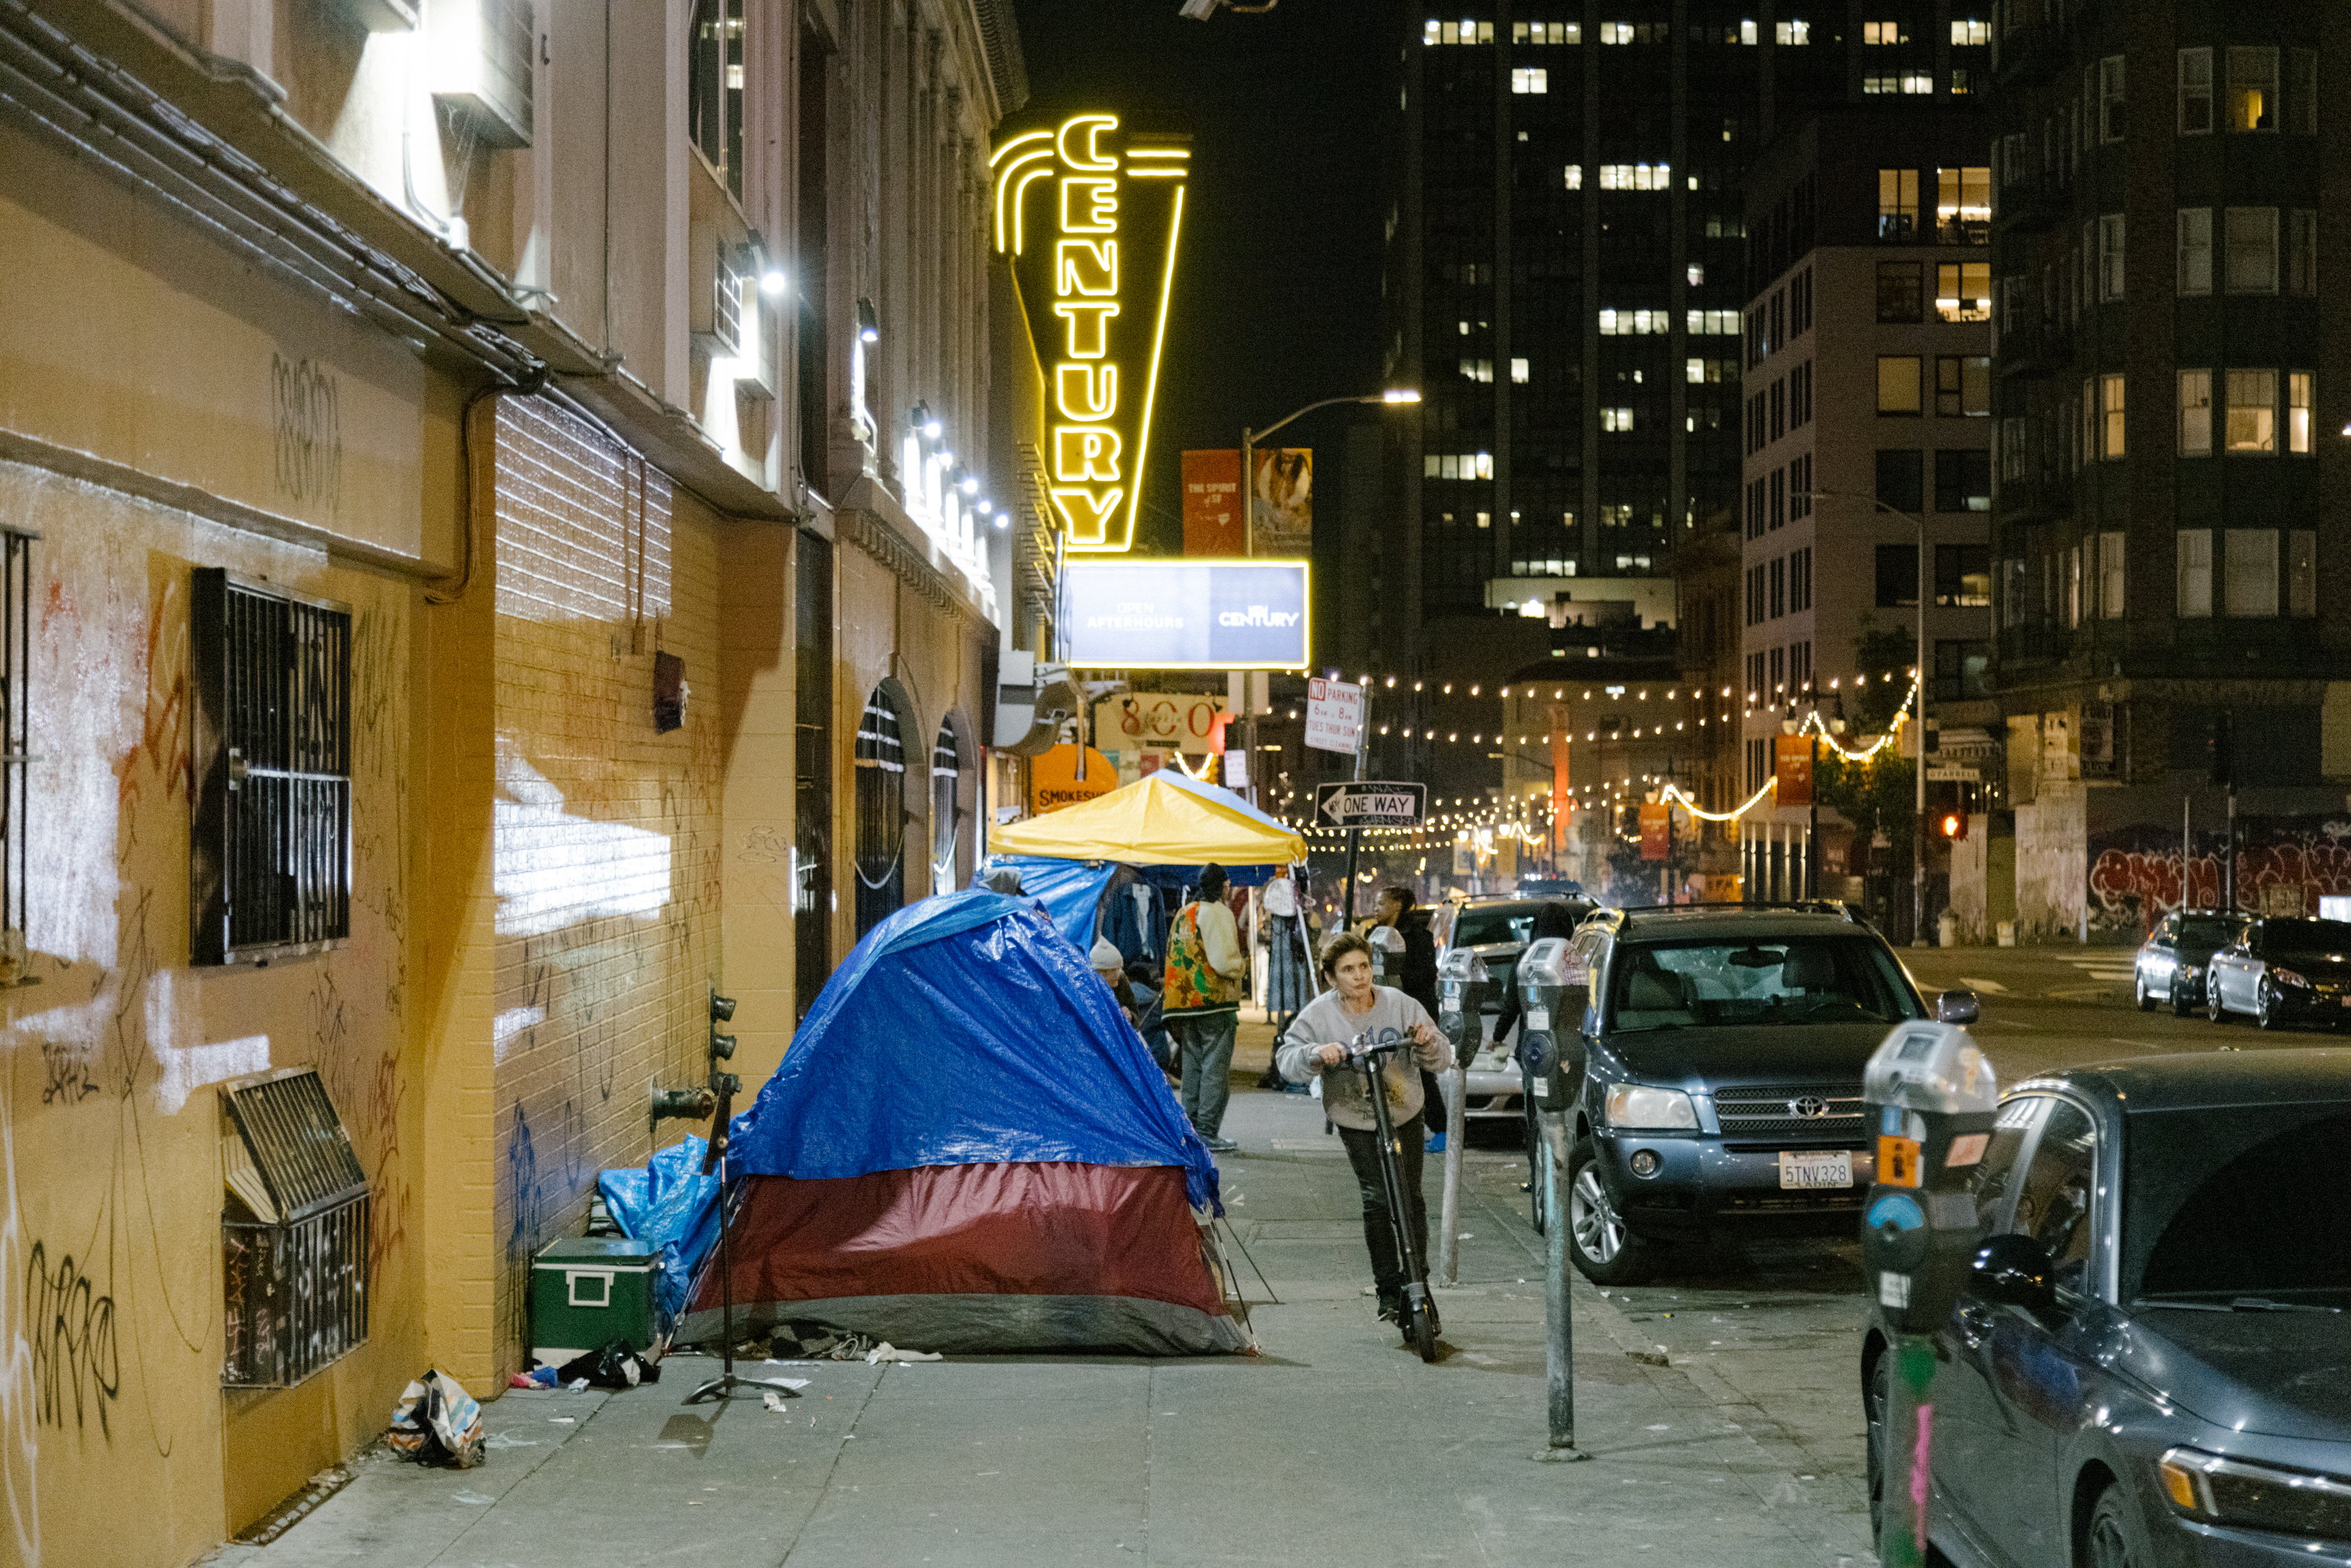 A city street at night with a blue tent on the sidewalk, neon signs, a parked scooter, and cars.